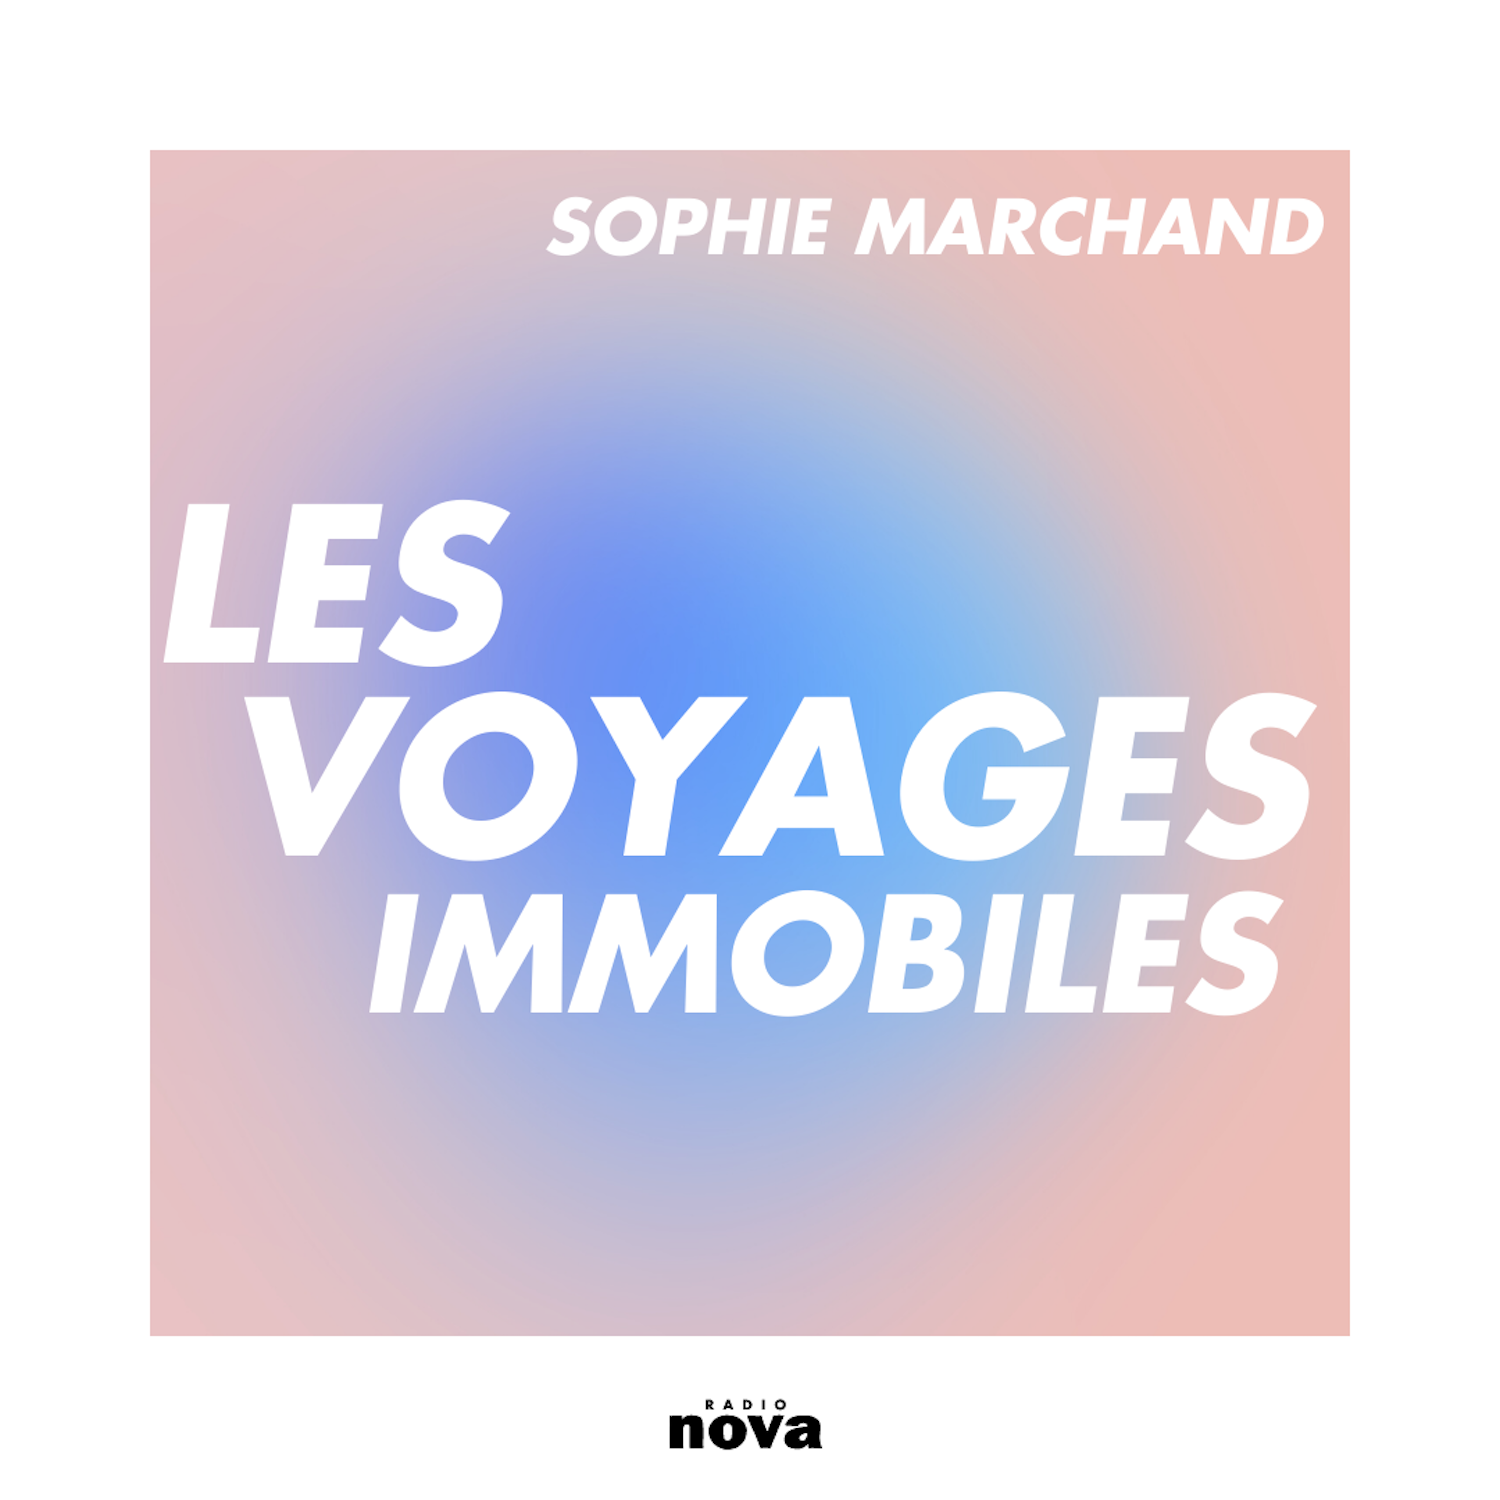 voyages immobiles explication